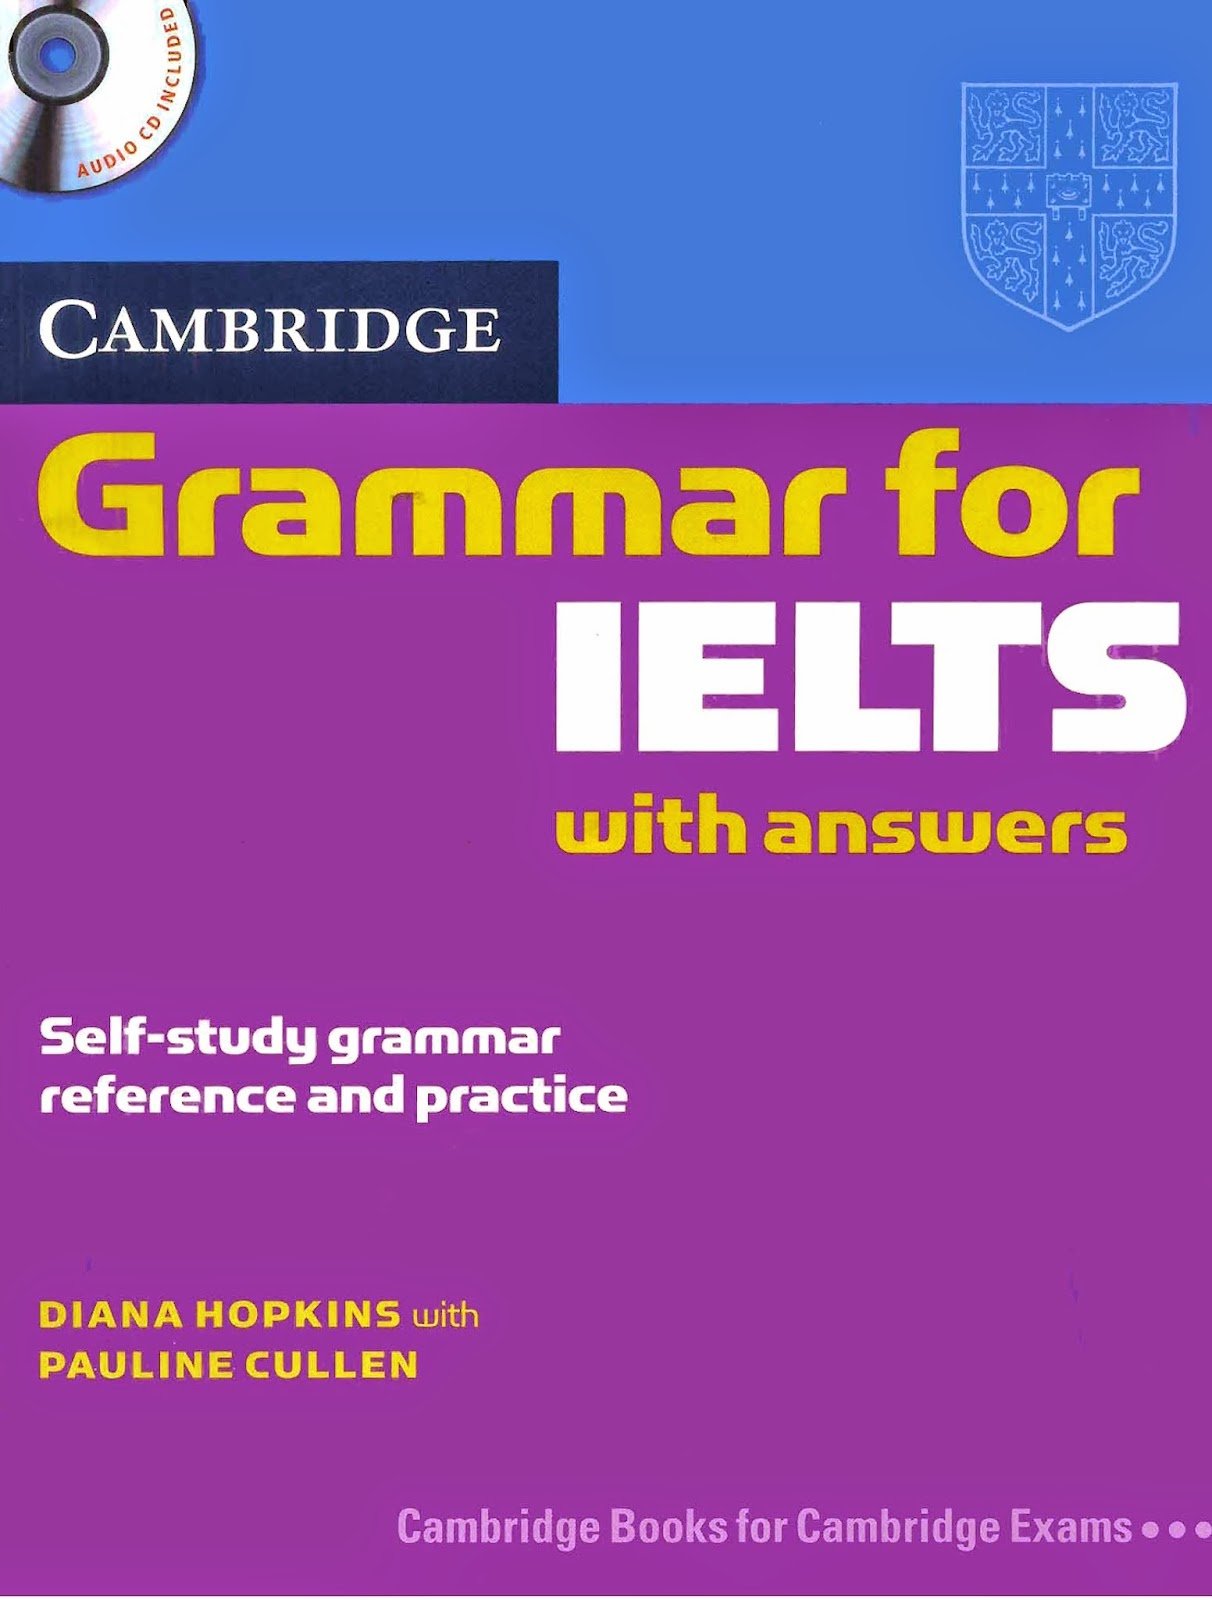 Cambridge Grammar For IELTS With Answers PDF Audio CD Free English Learning Material And